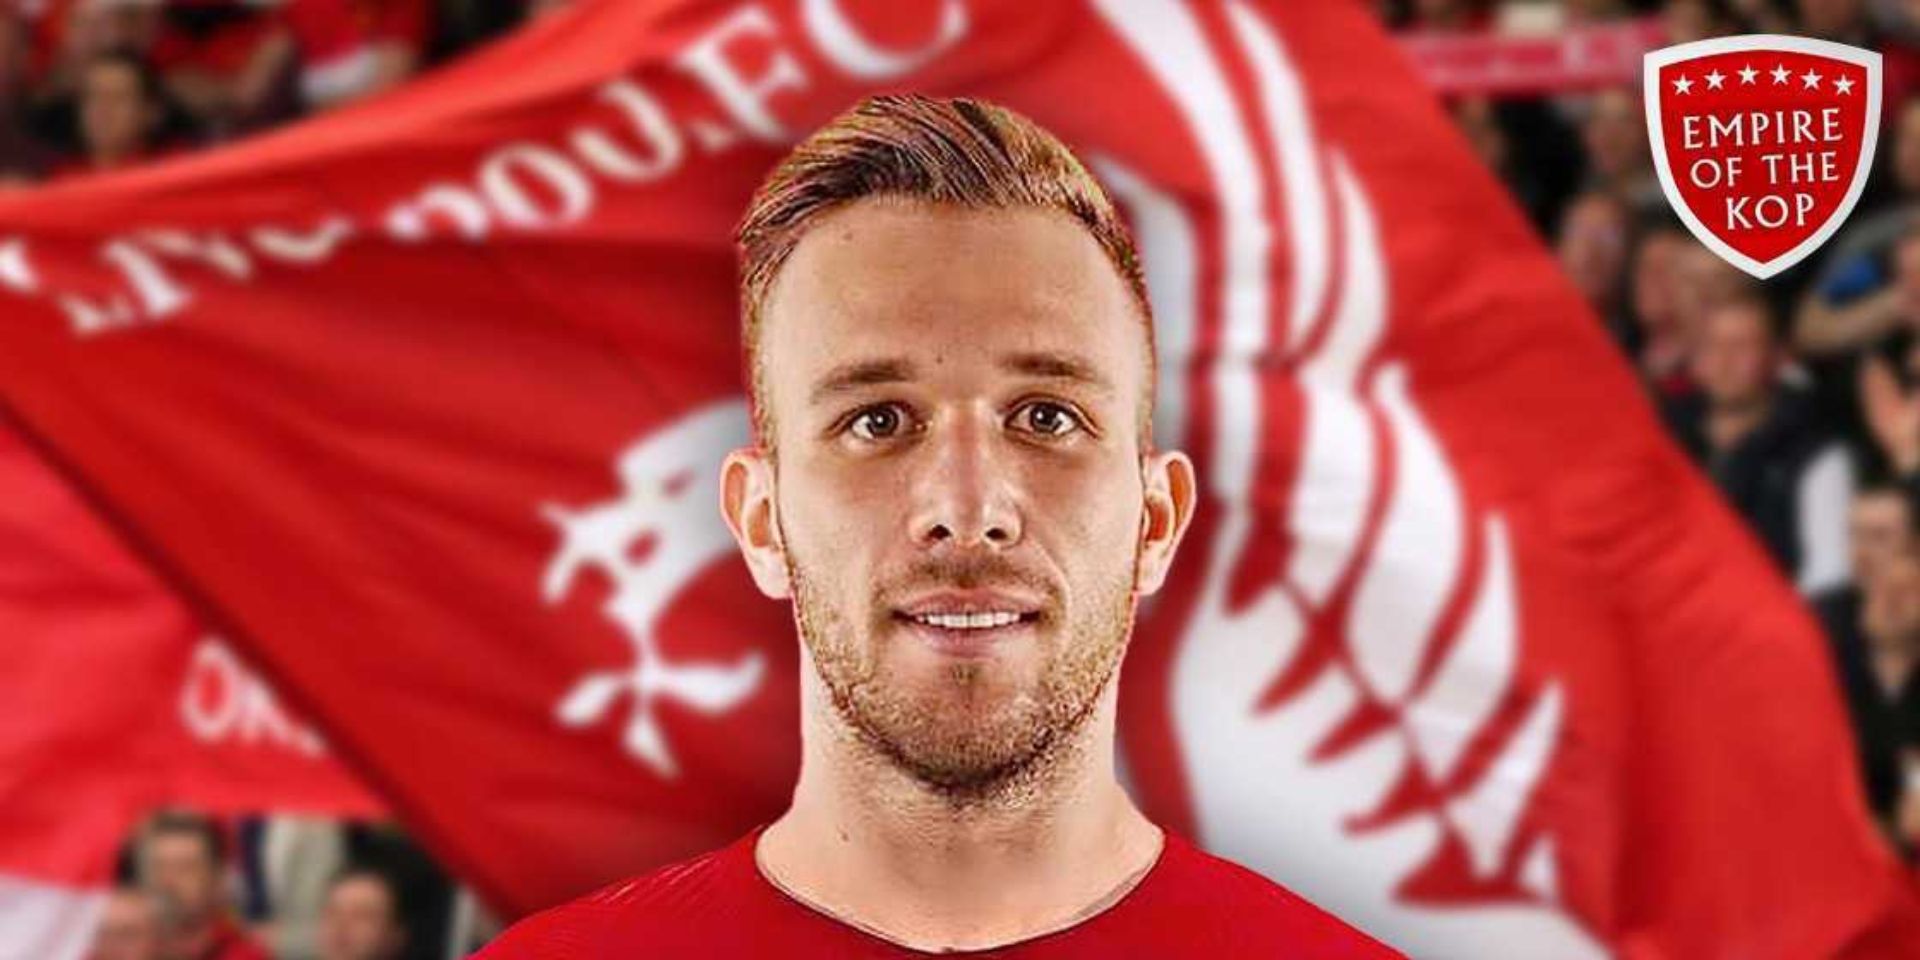 Breaking: Arthur Melo has signed for Liverpool with the Brazilian arriving on a one-year loan deal from Juventus